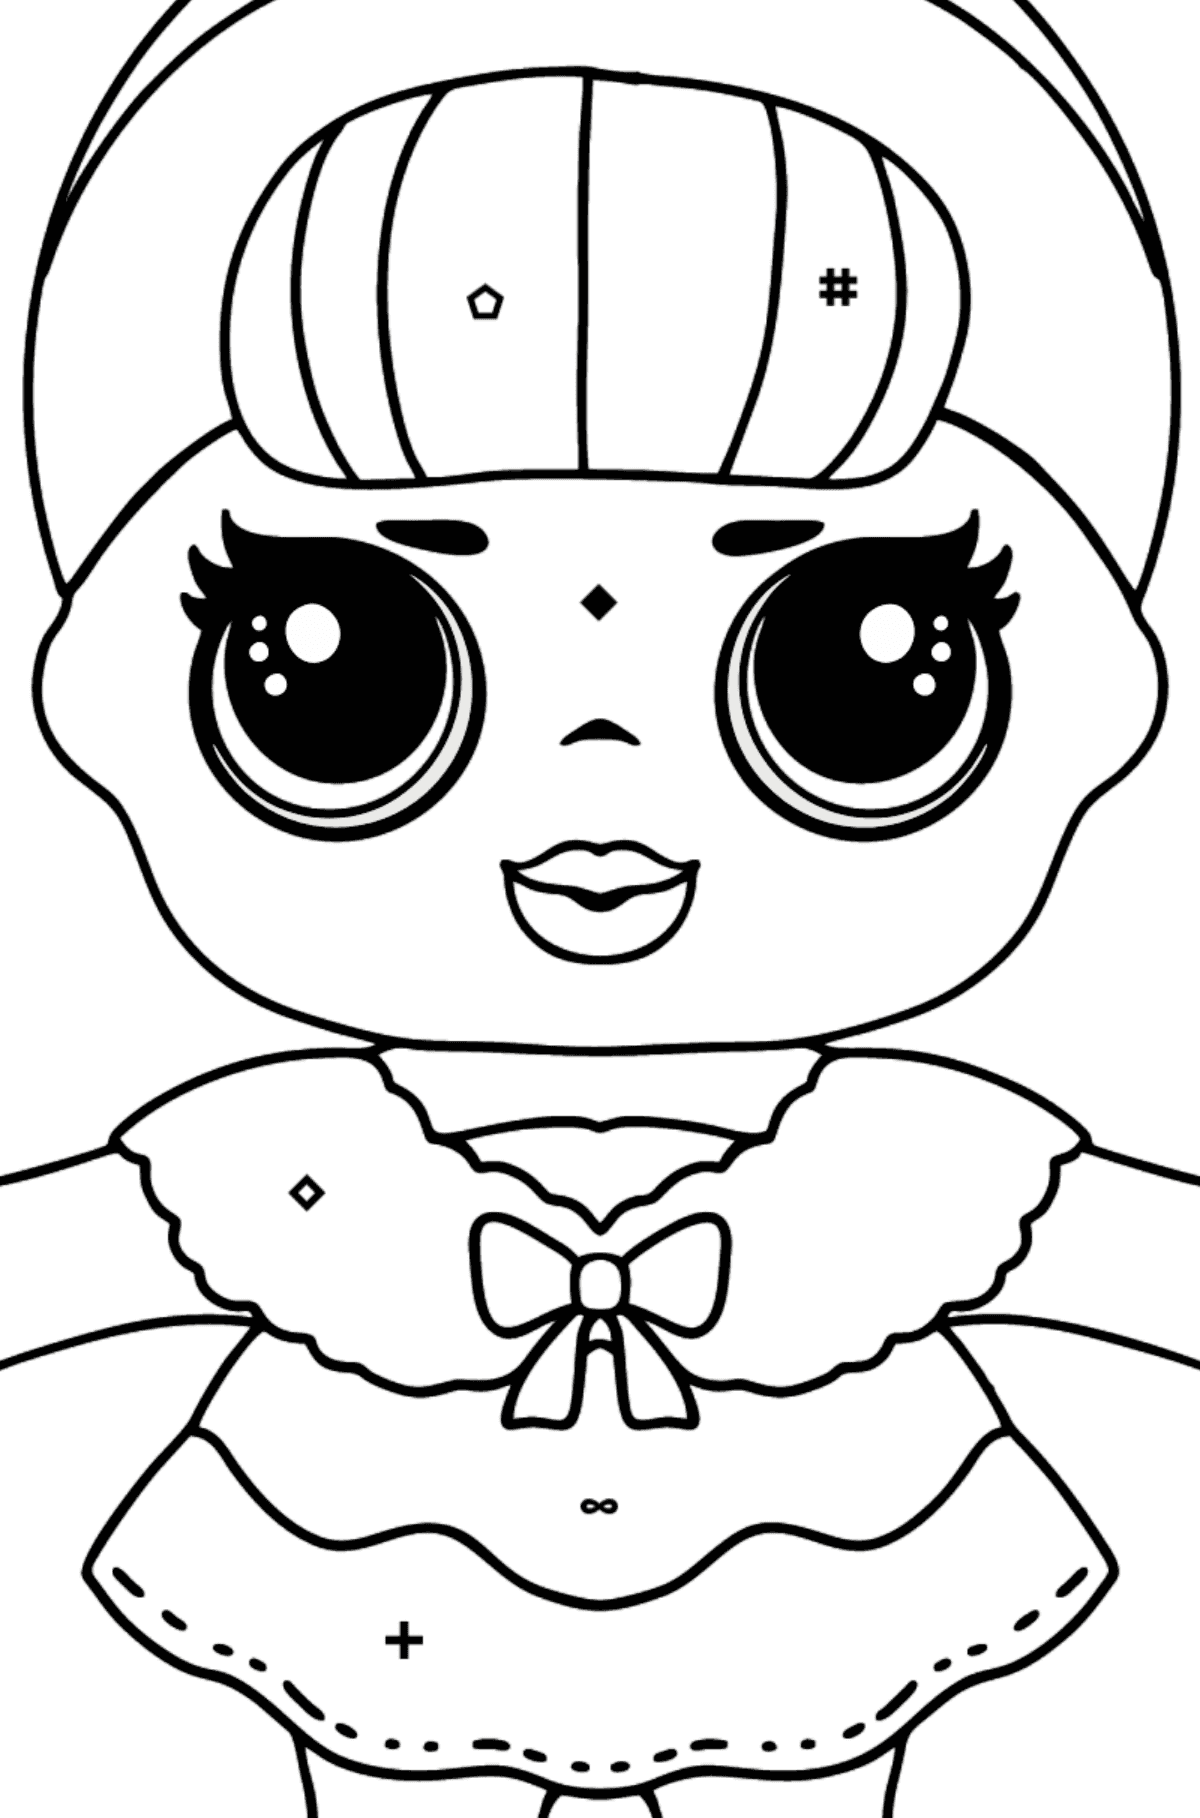 LOL Surprise Doll Crystal Queen - Coloring by Symbols and Geometric Shapes for Kids